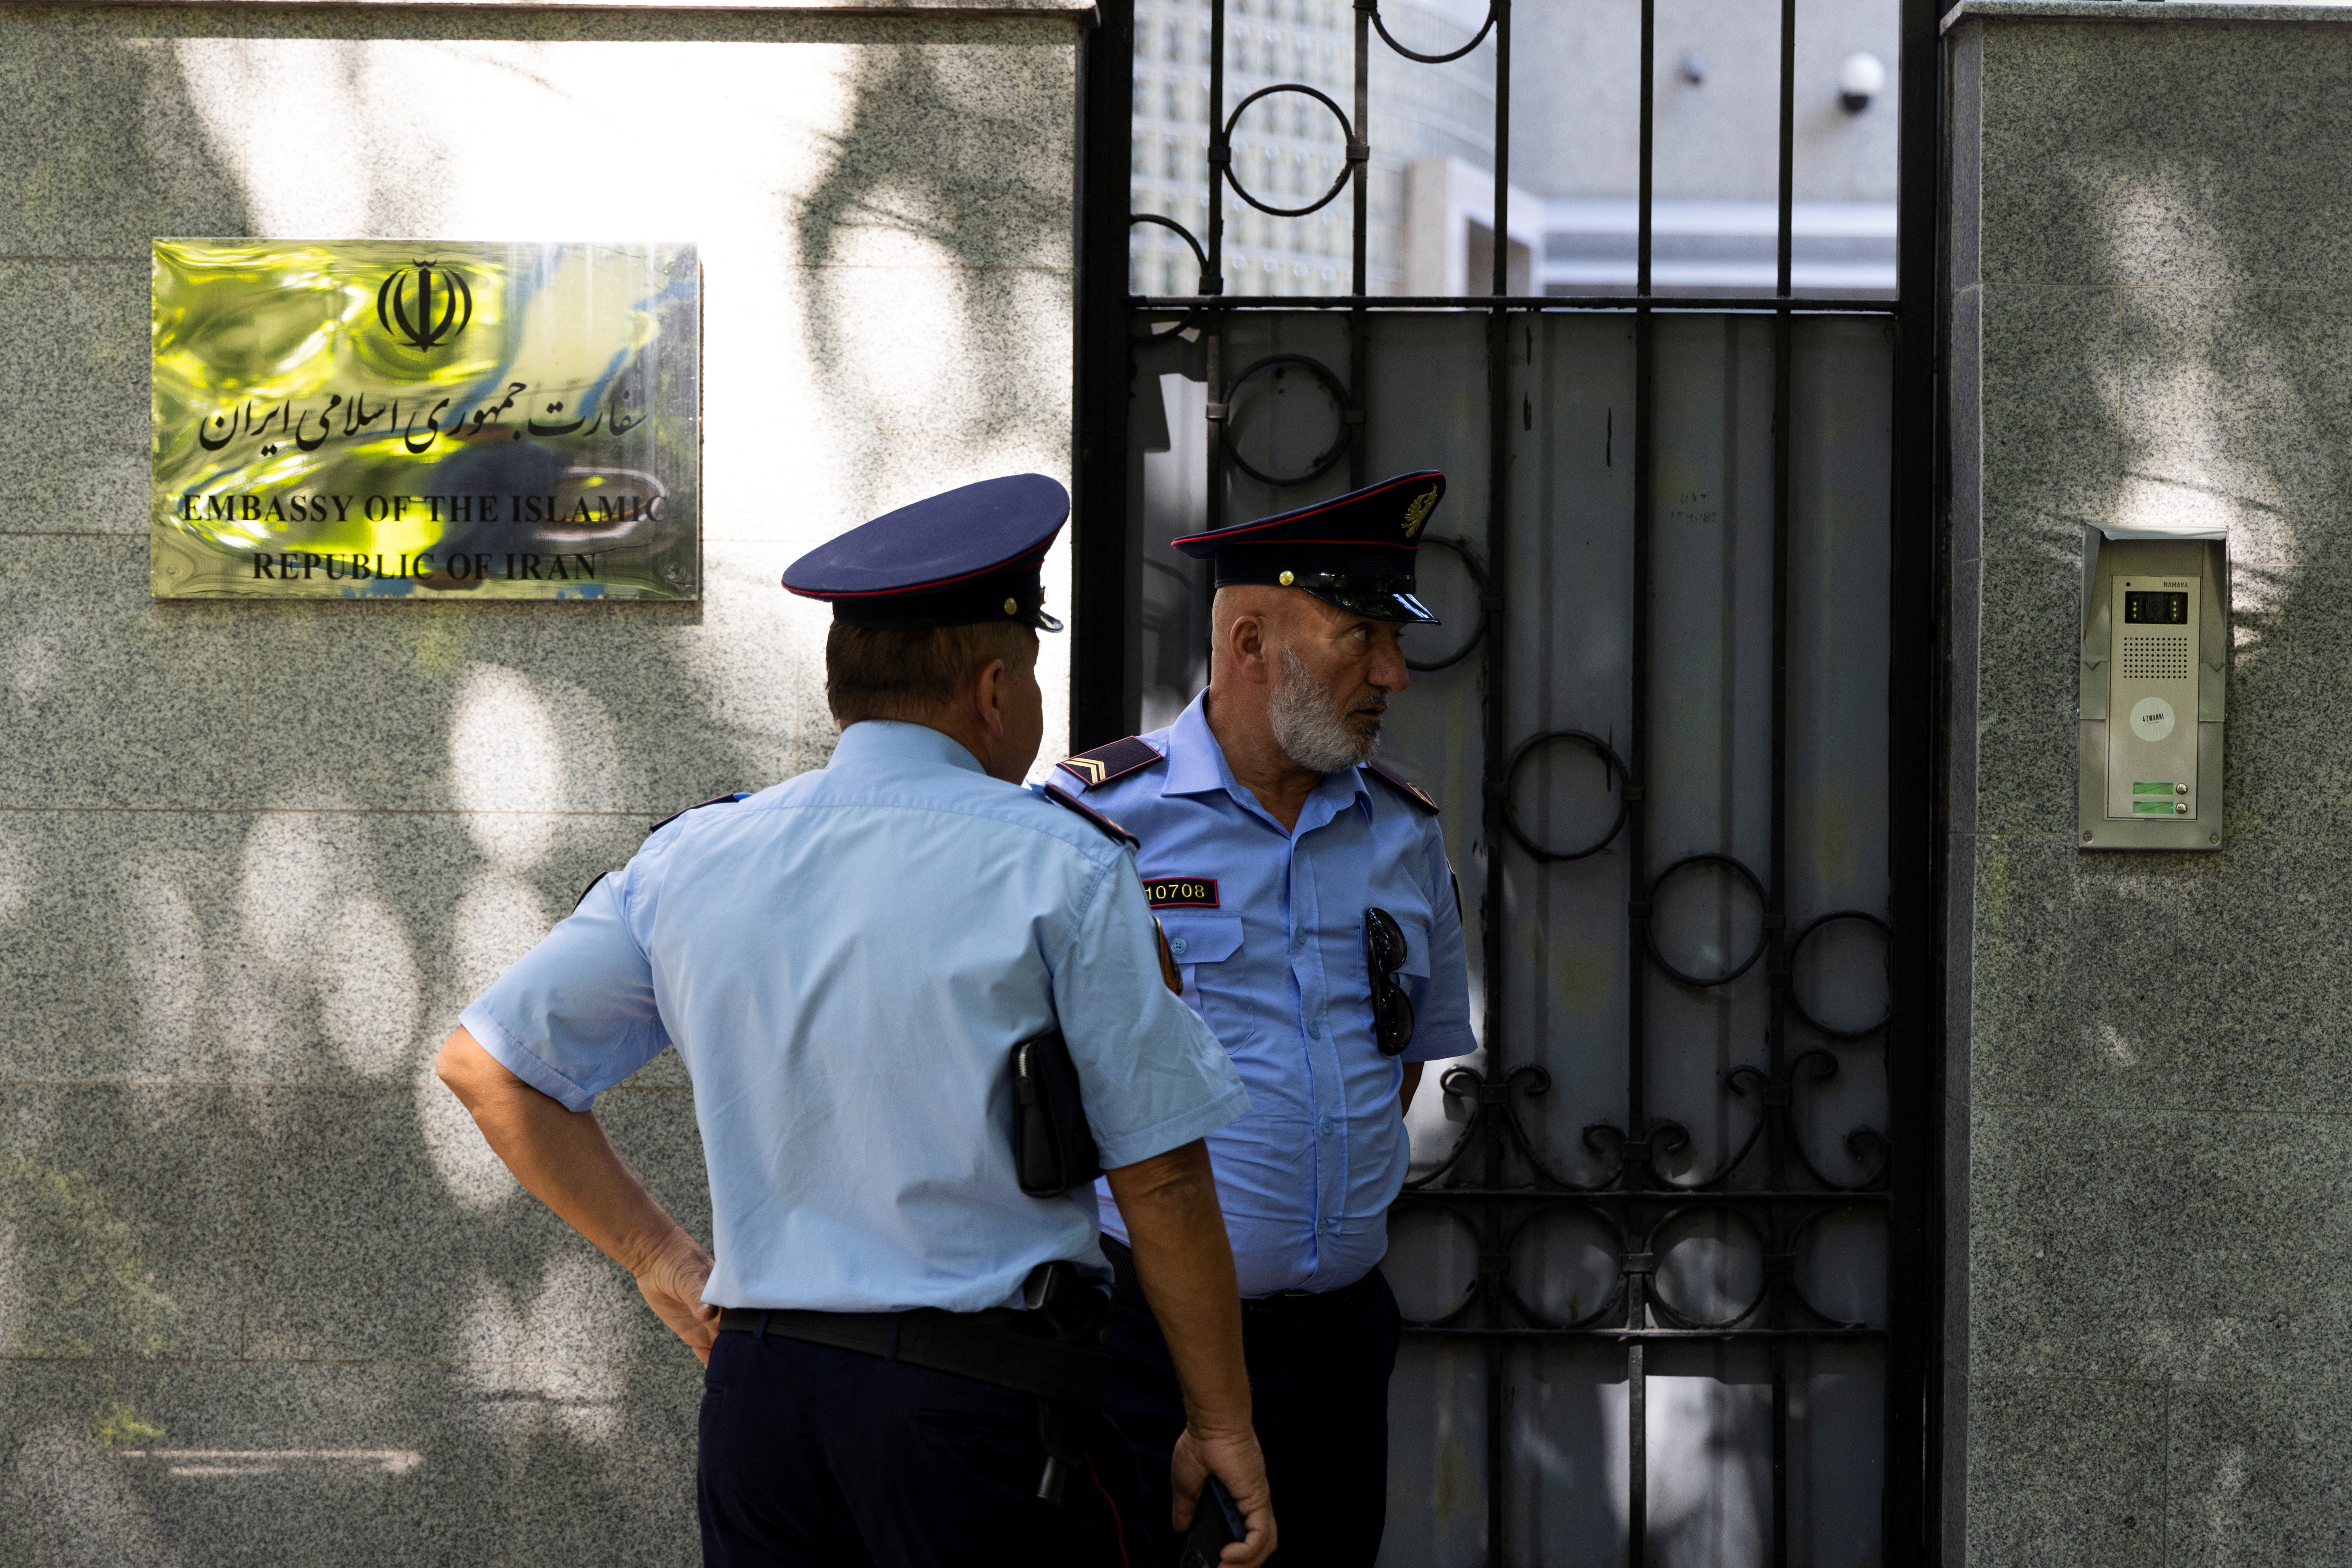 Police officers stands in front of the Embassy of the Islamic Republic of Iran in Tirana